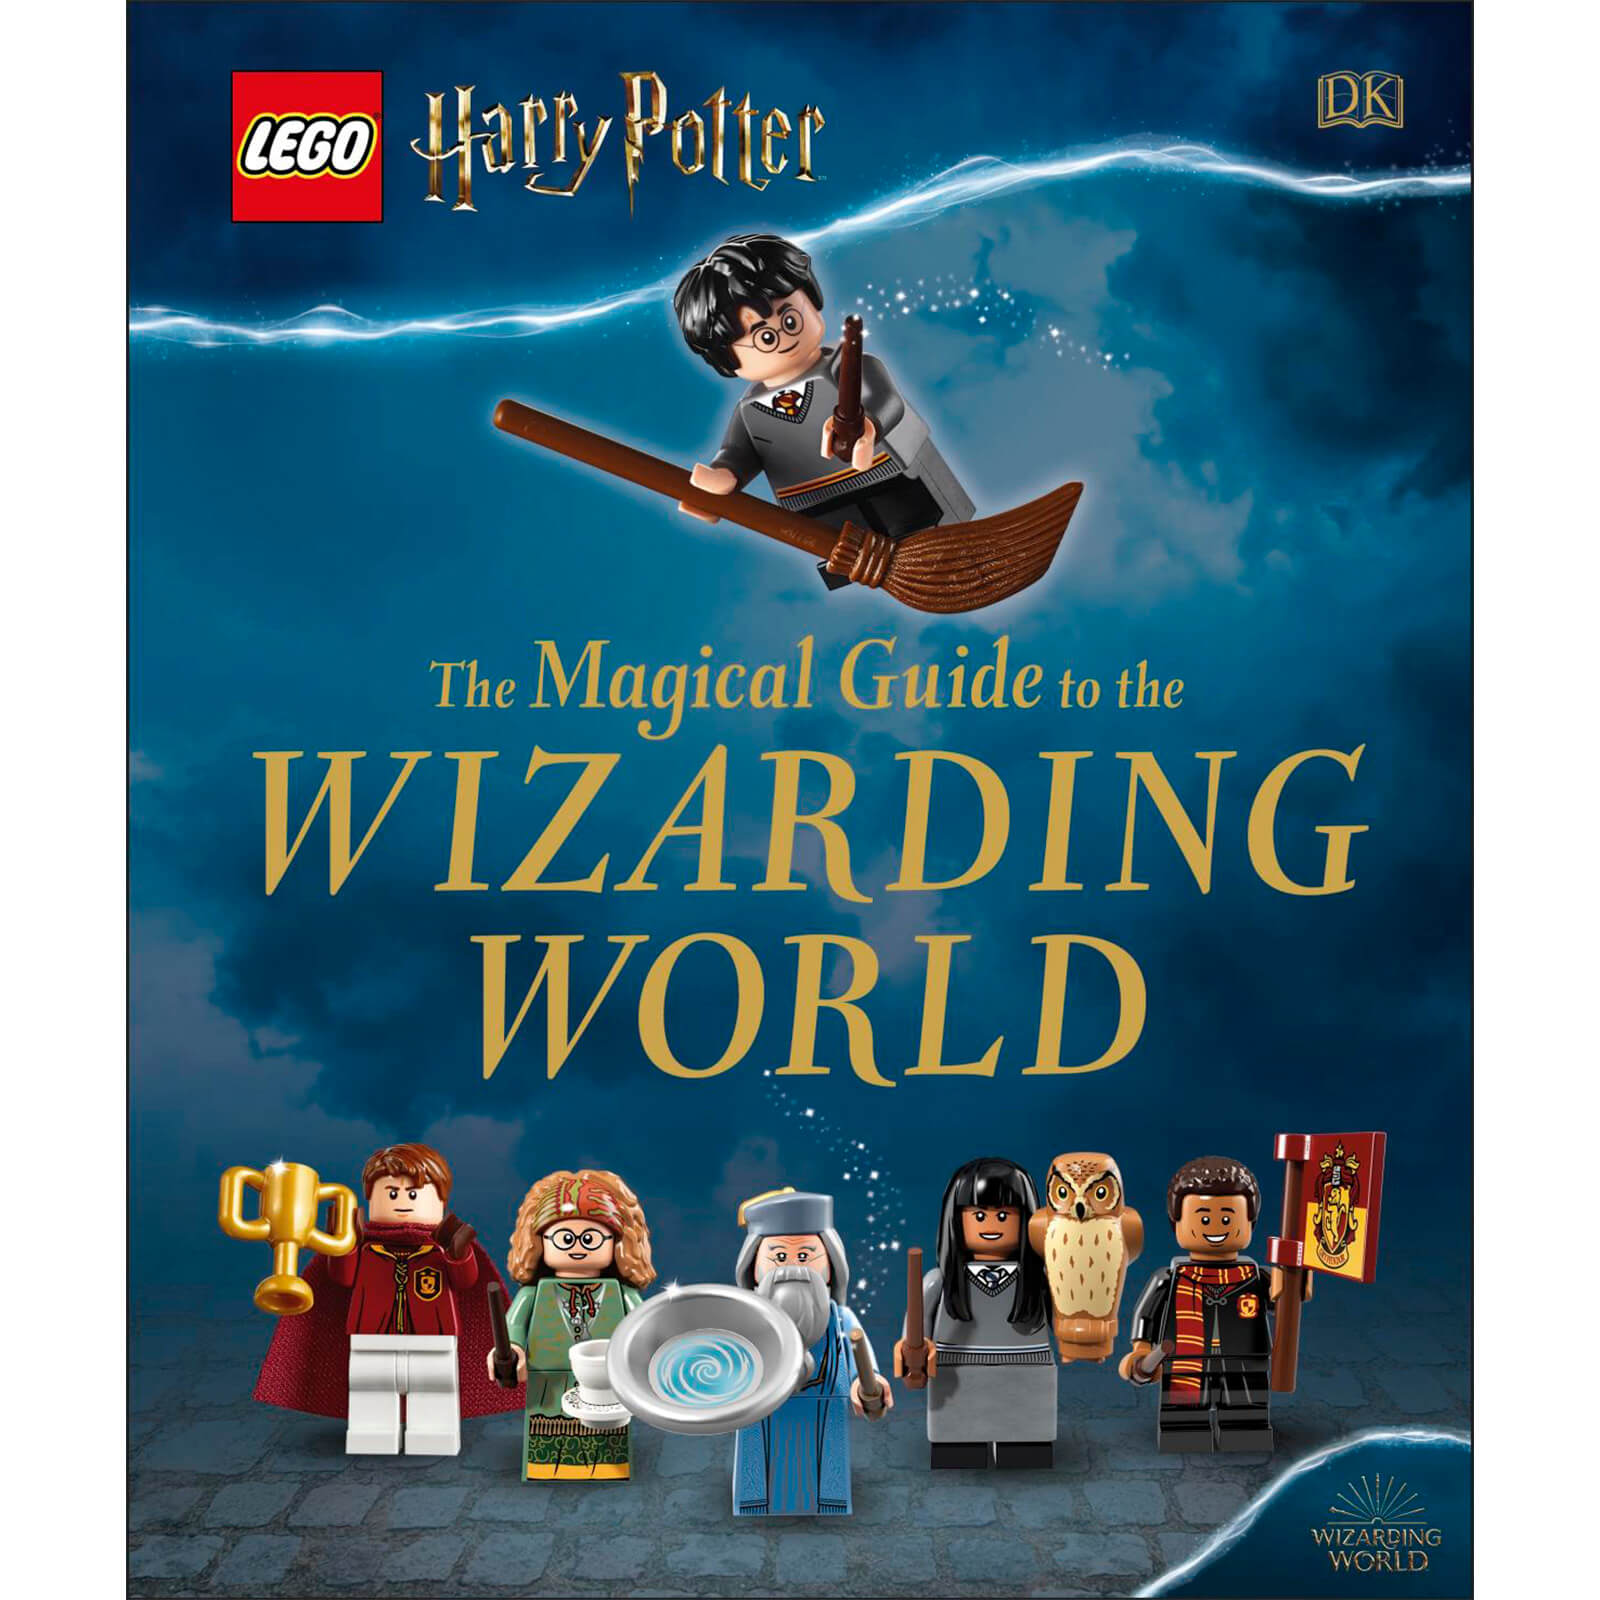 DK Books LEGO Harry Potter The Magical Guide to the Wizarding World Hardback